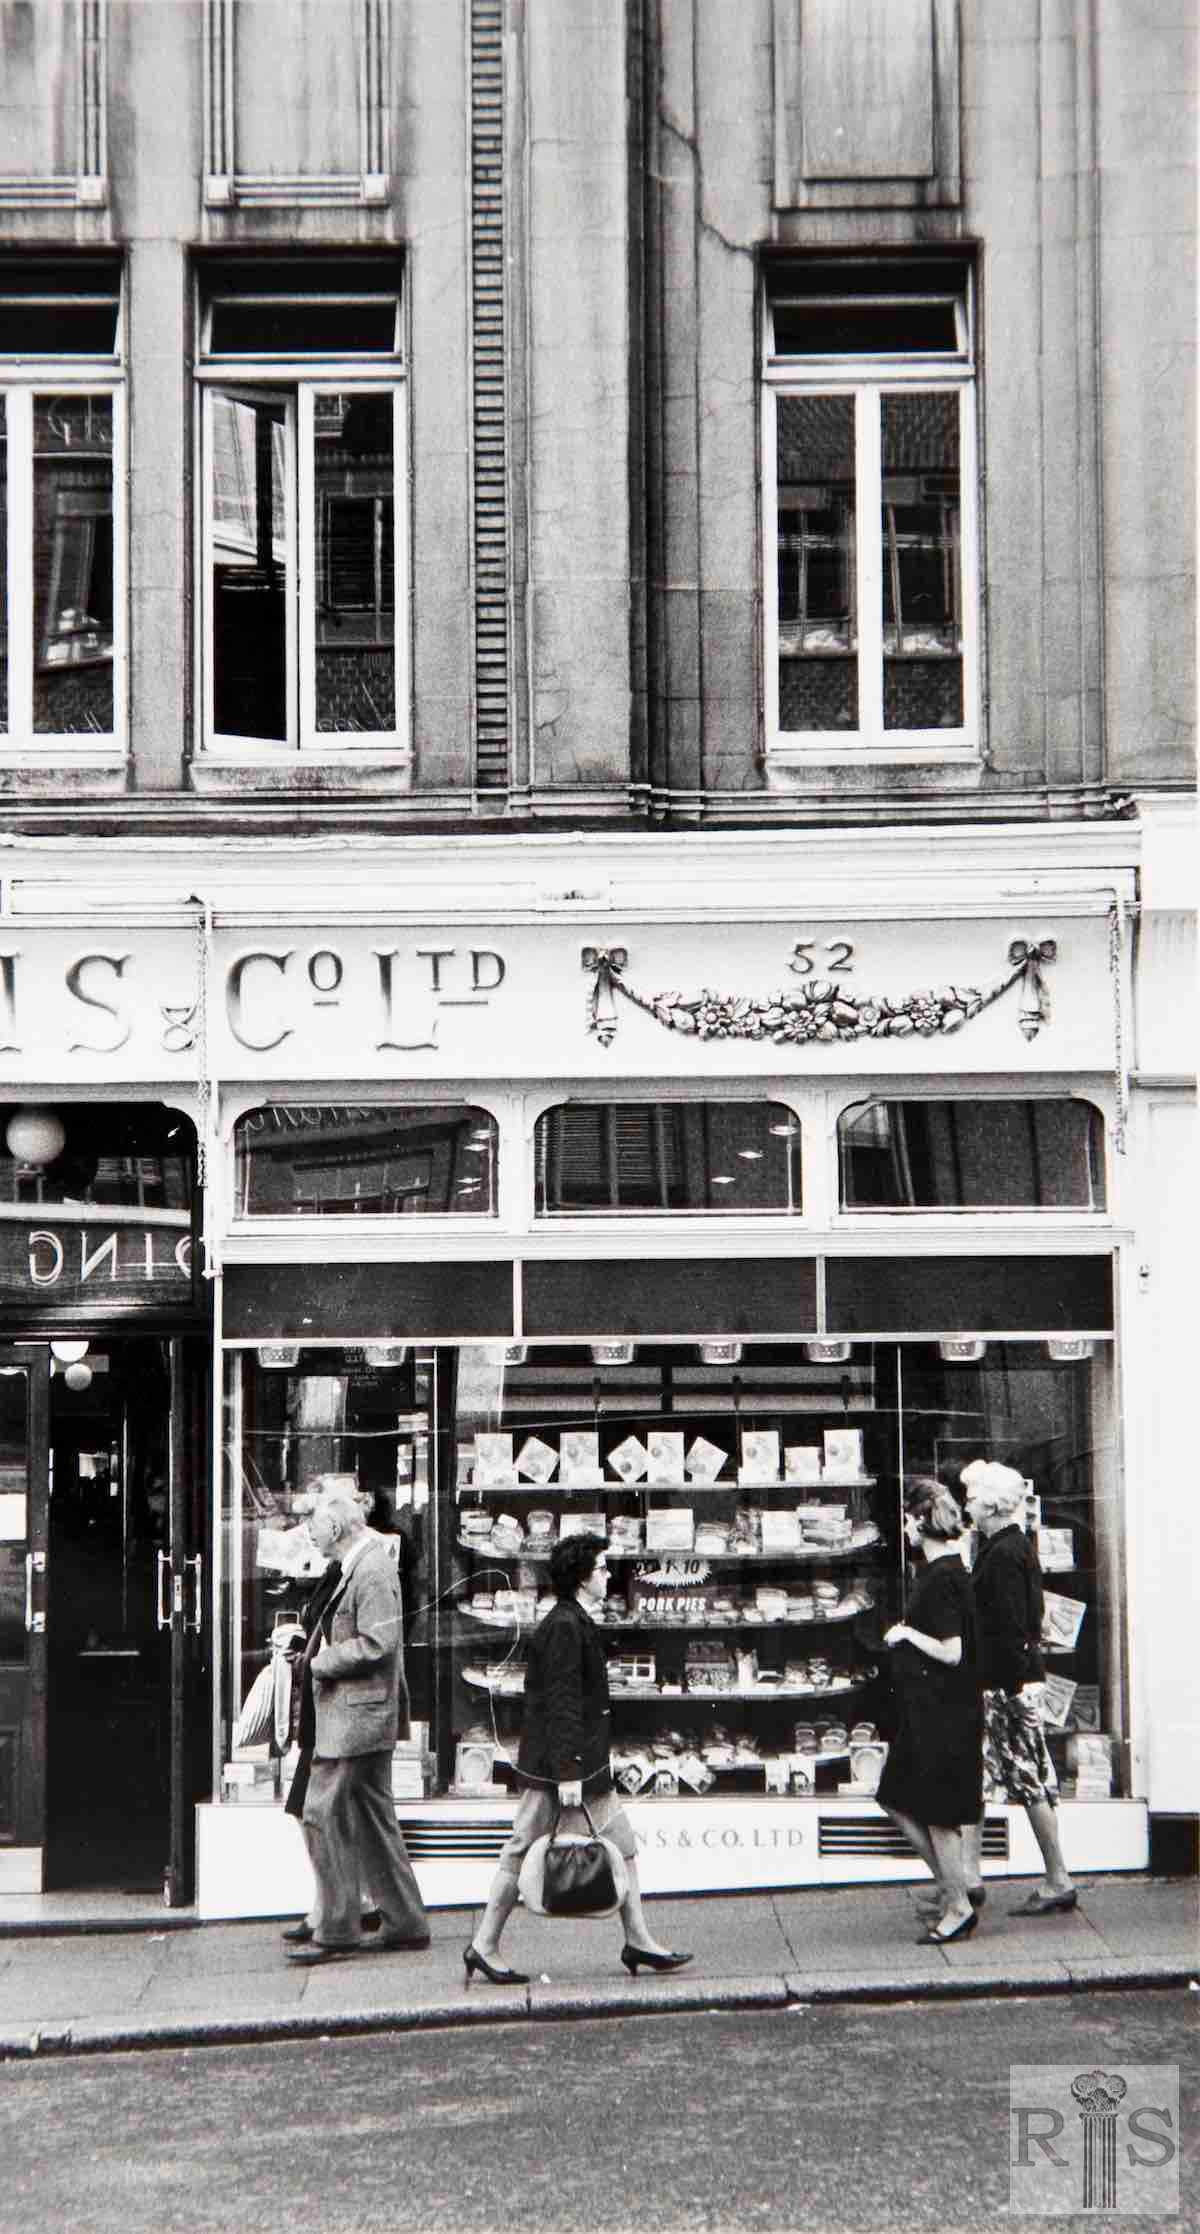 NORTH STREET IN THE 1960s